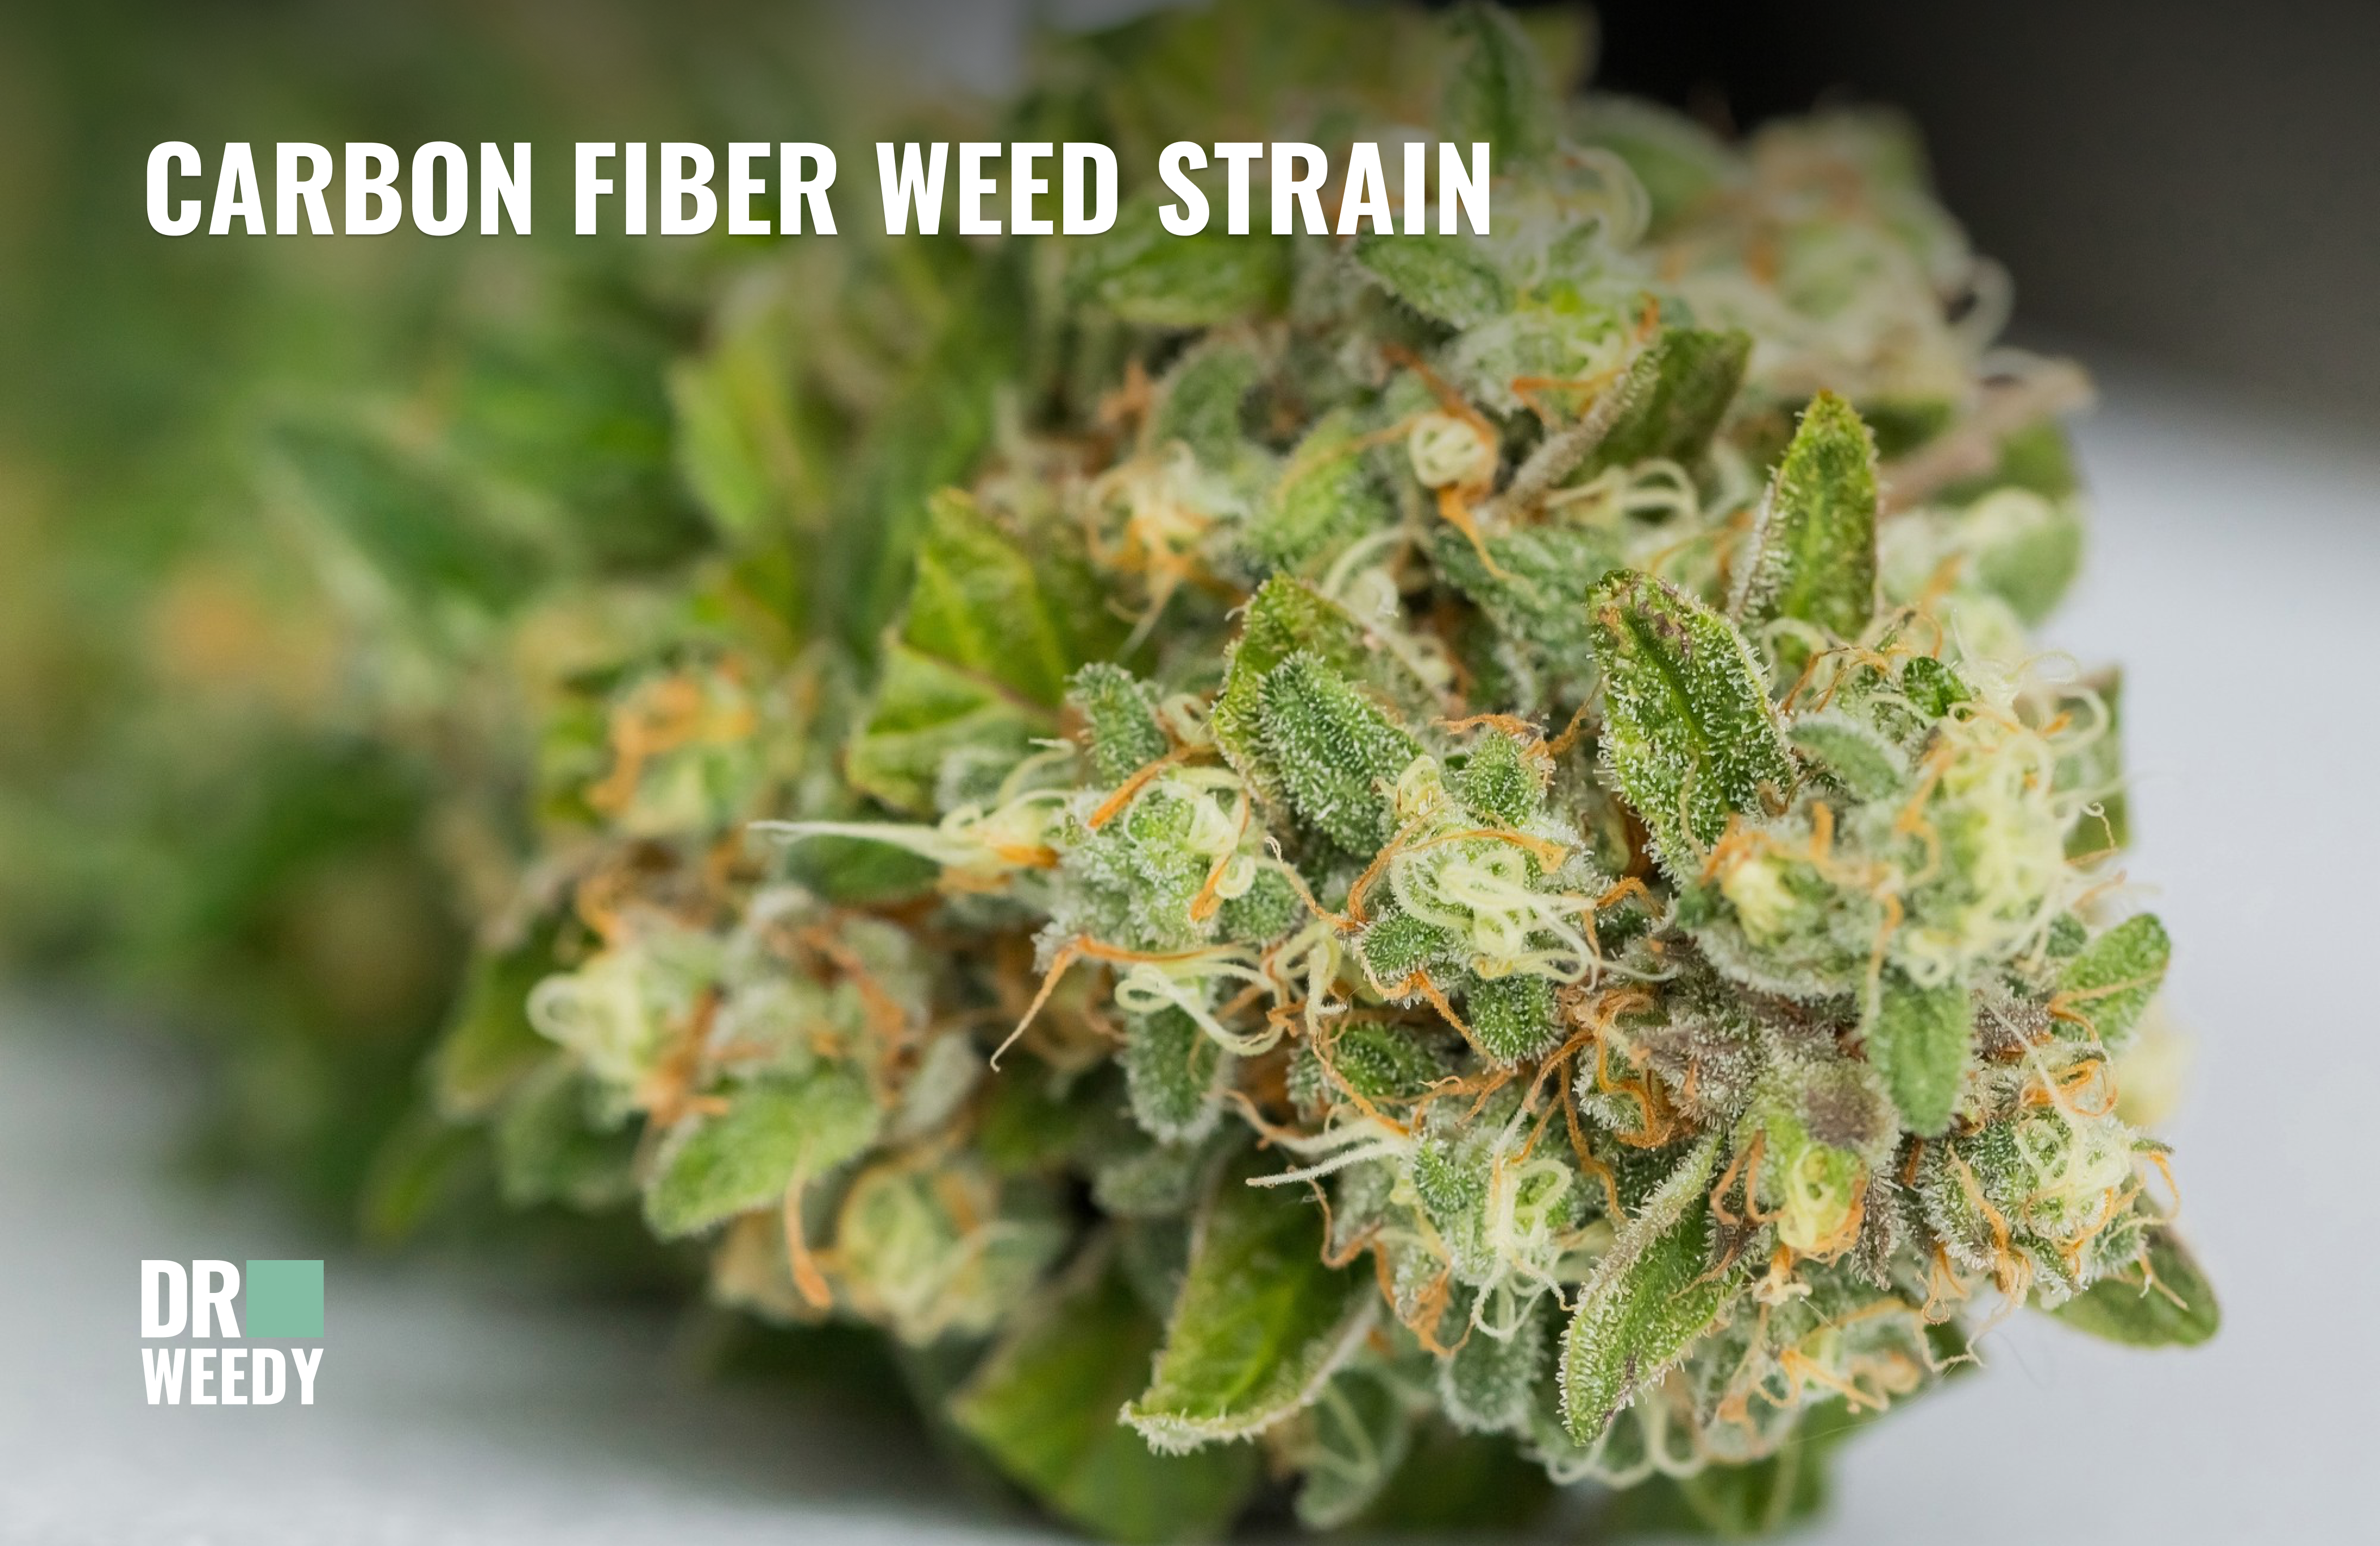 Carbon Fiber Weed Strain Overview